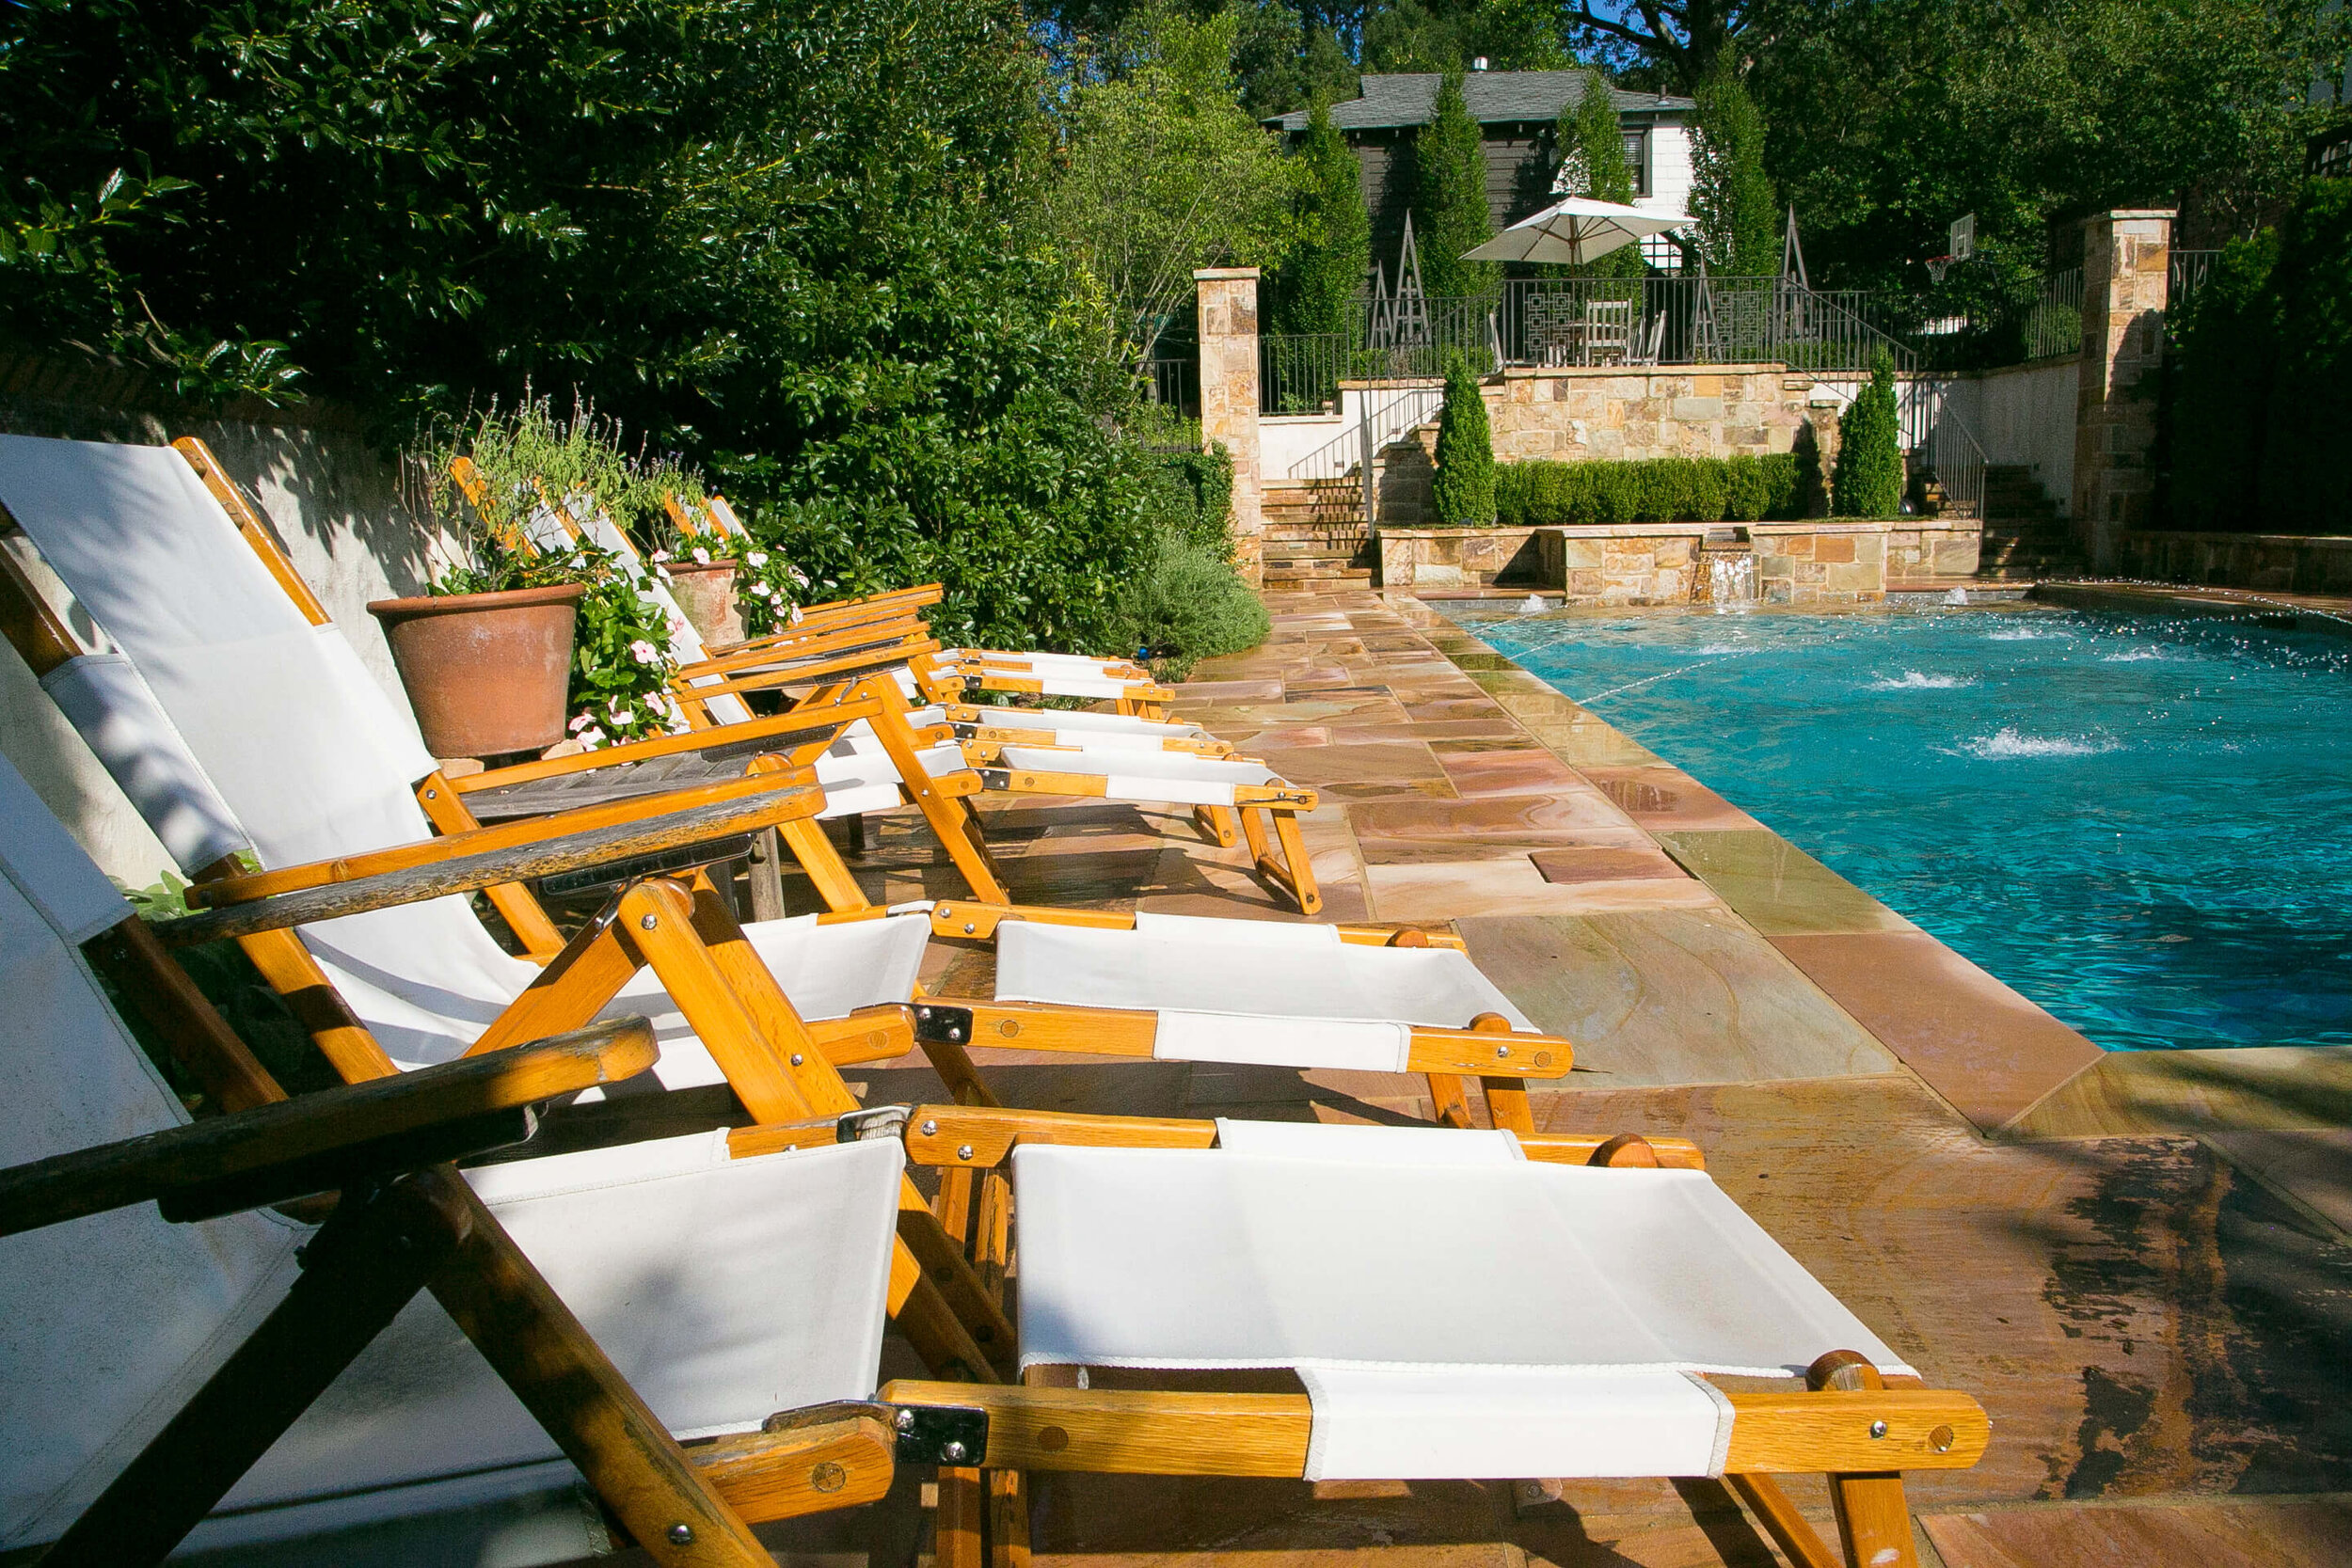 Stone 1_chaise loungers and pool.JPG